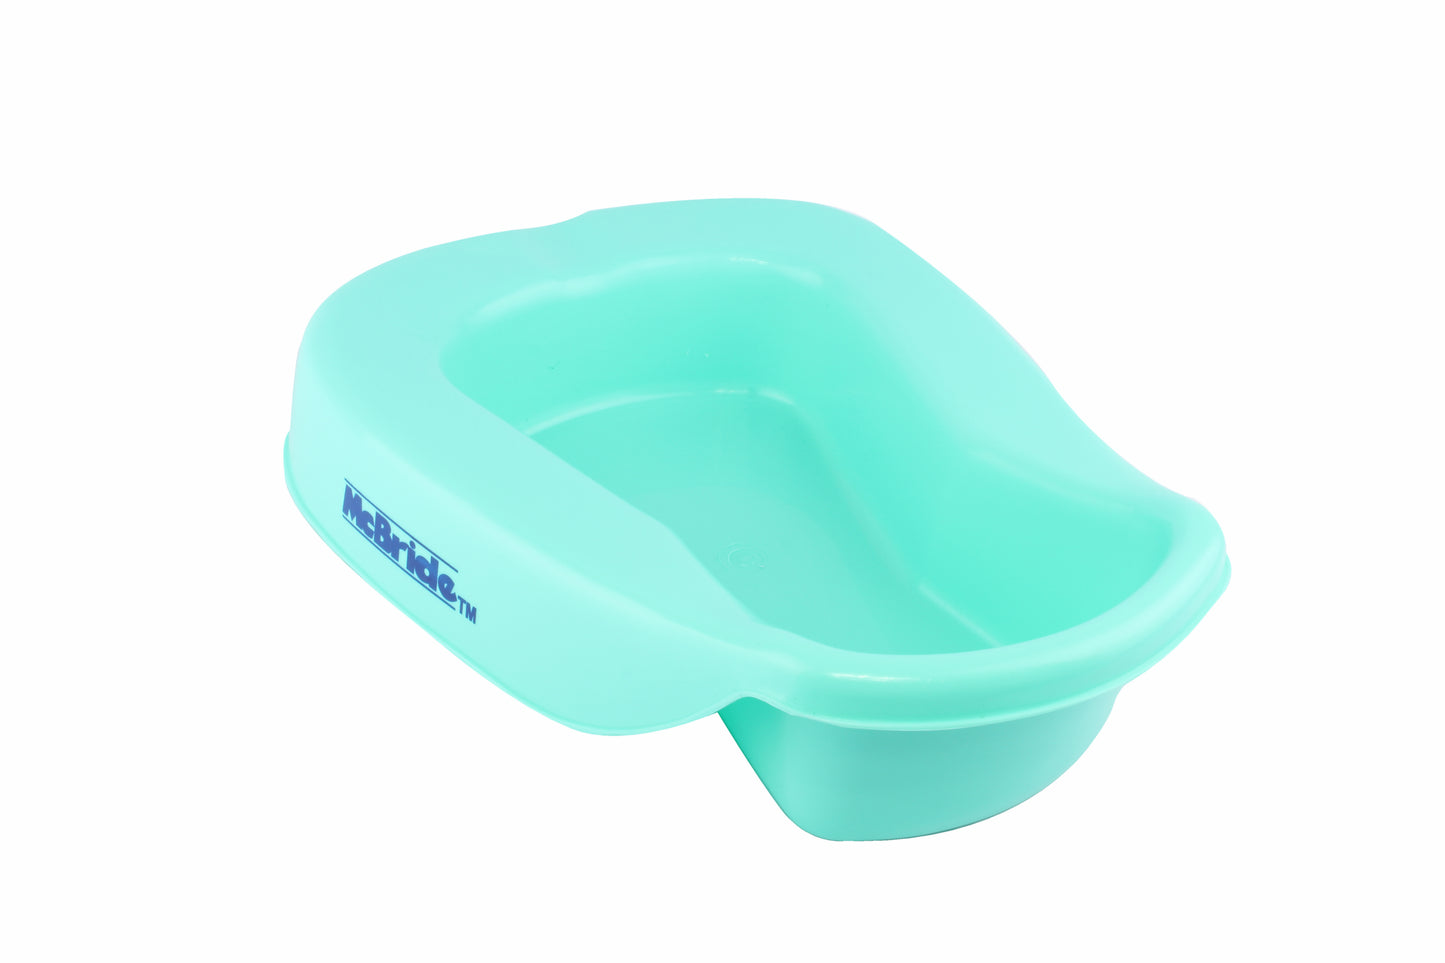 McBride Bed Pan - A medical bedpan for patients.